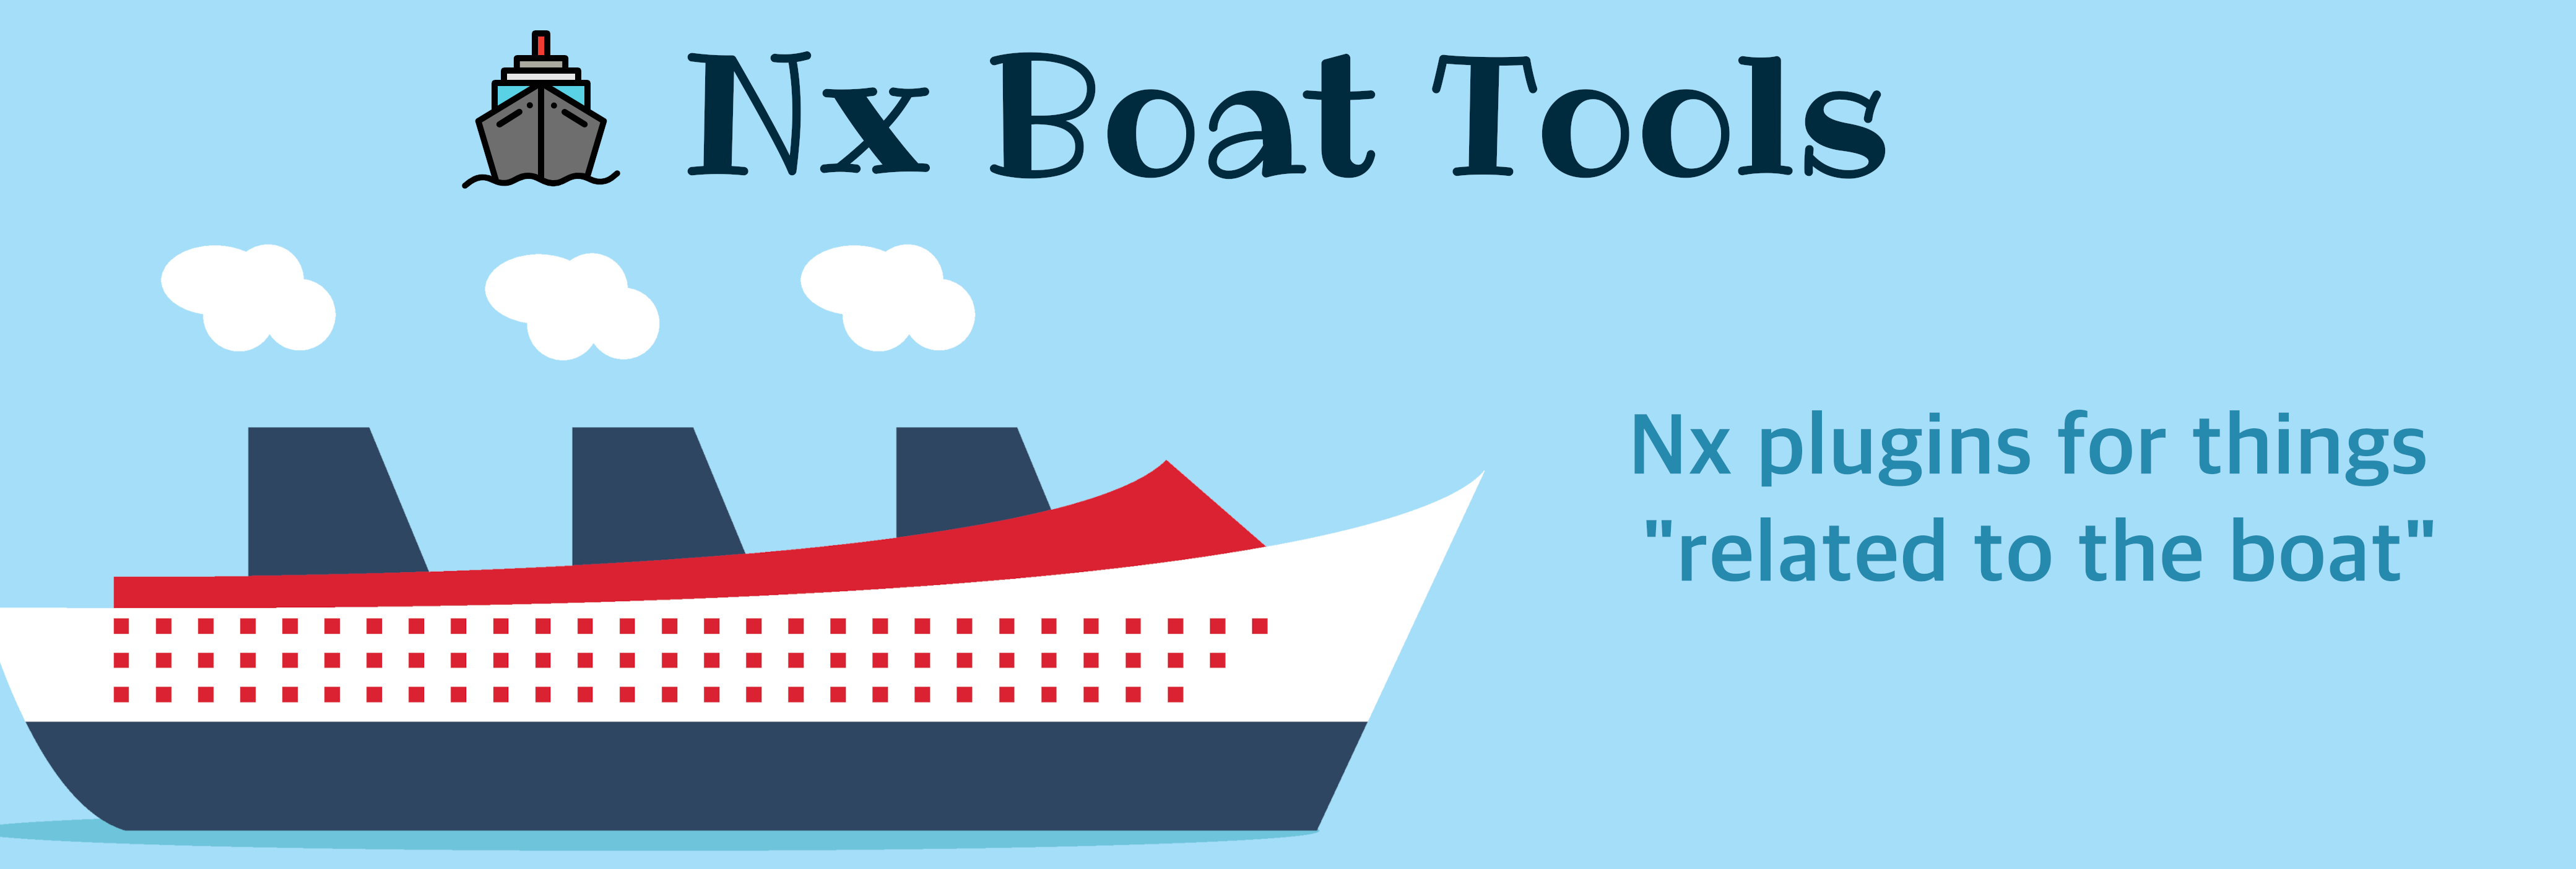 GitHub - nx-boat-tools/nx-boat-tools: Nx tools for things related